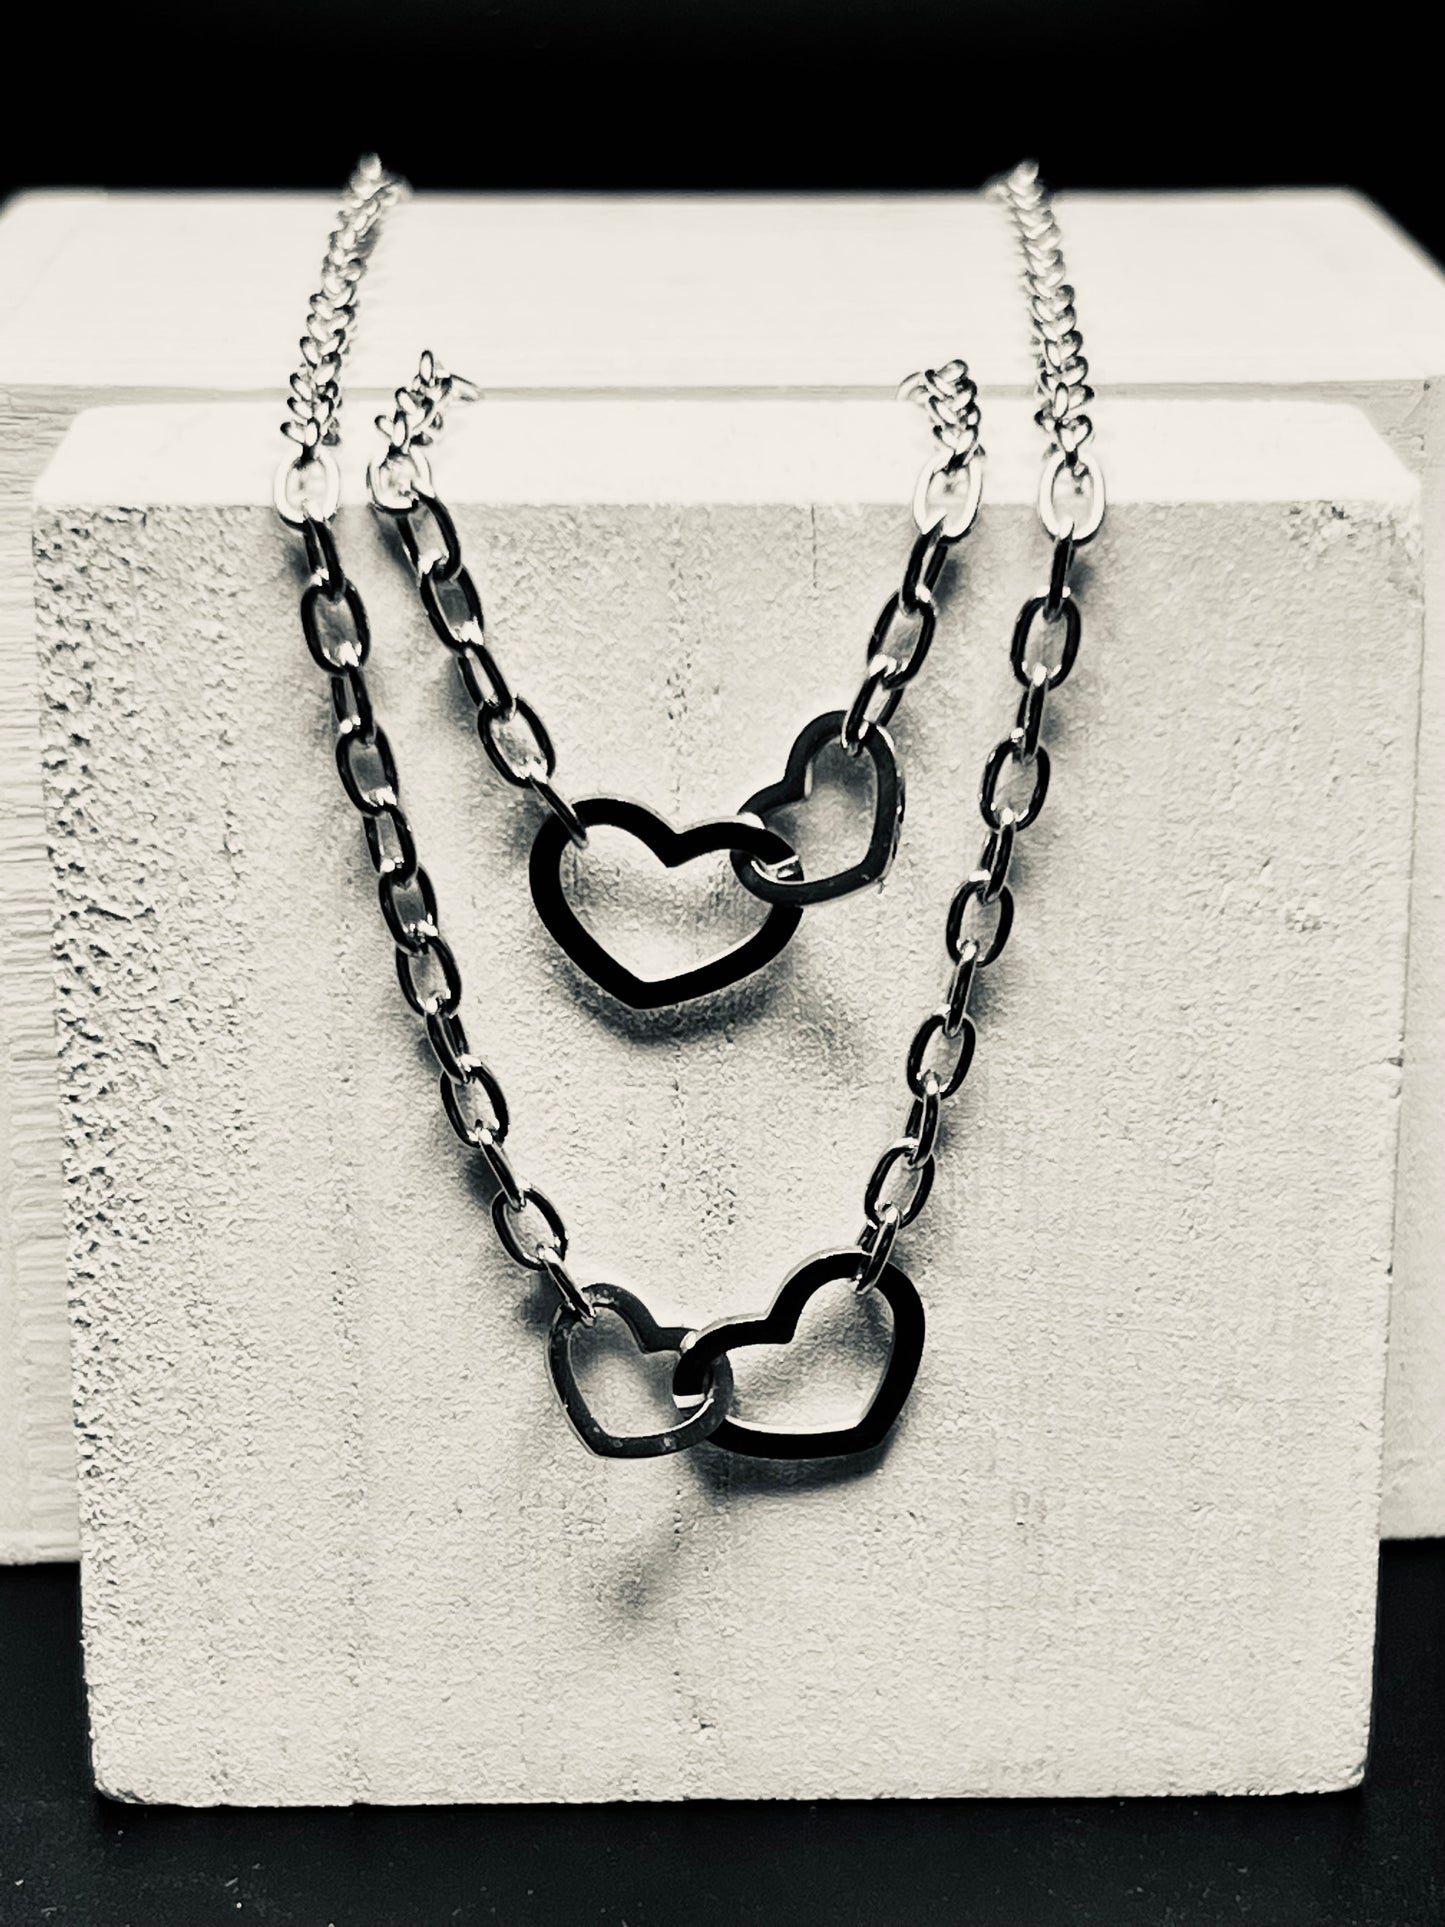 Stainless Steel Connected Hearts Necklace and Bracelet